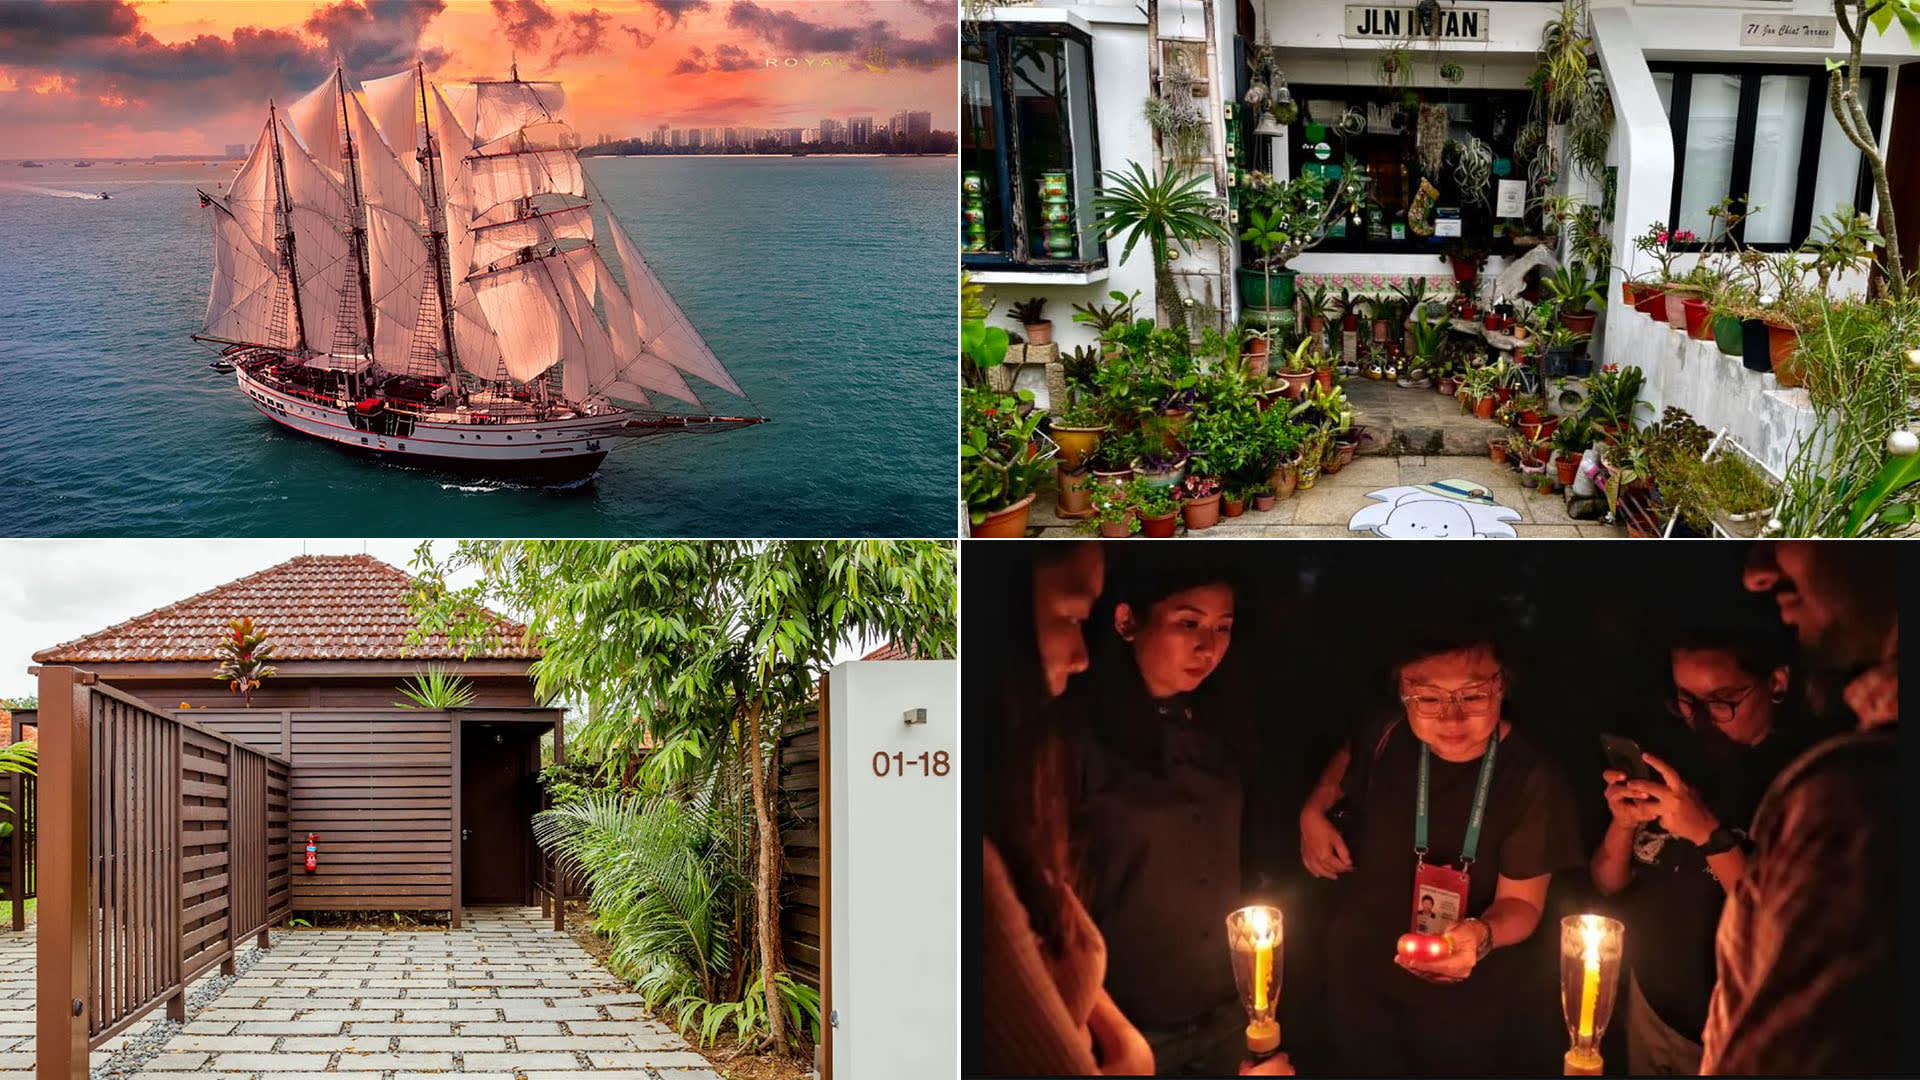 Unique Things To Do In Singapore That You Probably Haven’t Tried Yet, From Farmstays To Home Museum Visits